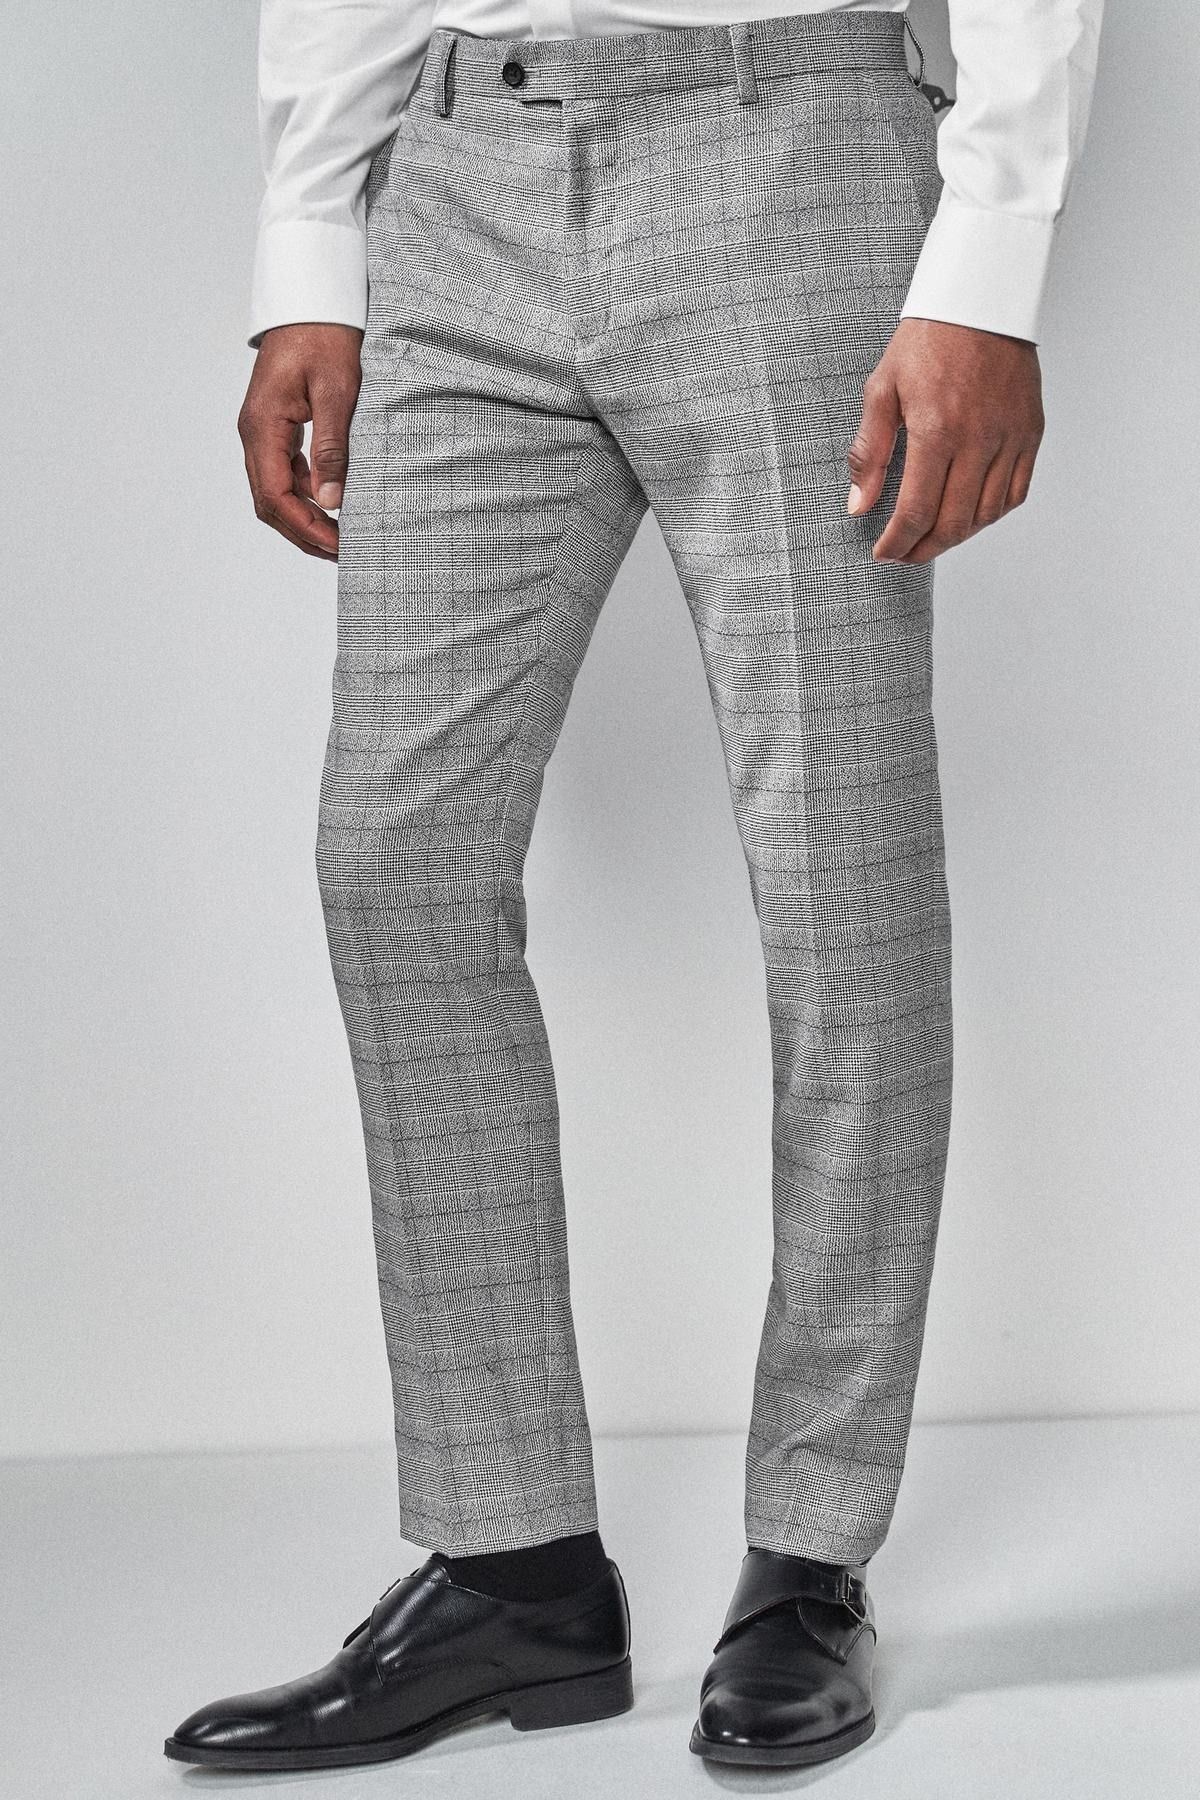 Mens Checked Trousers | Skinny & Slim Fit Checked Trousers | Next UK